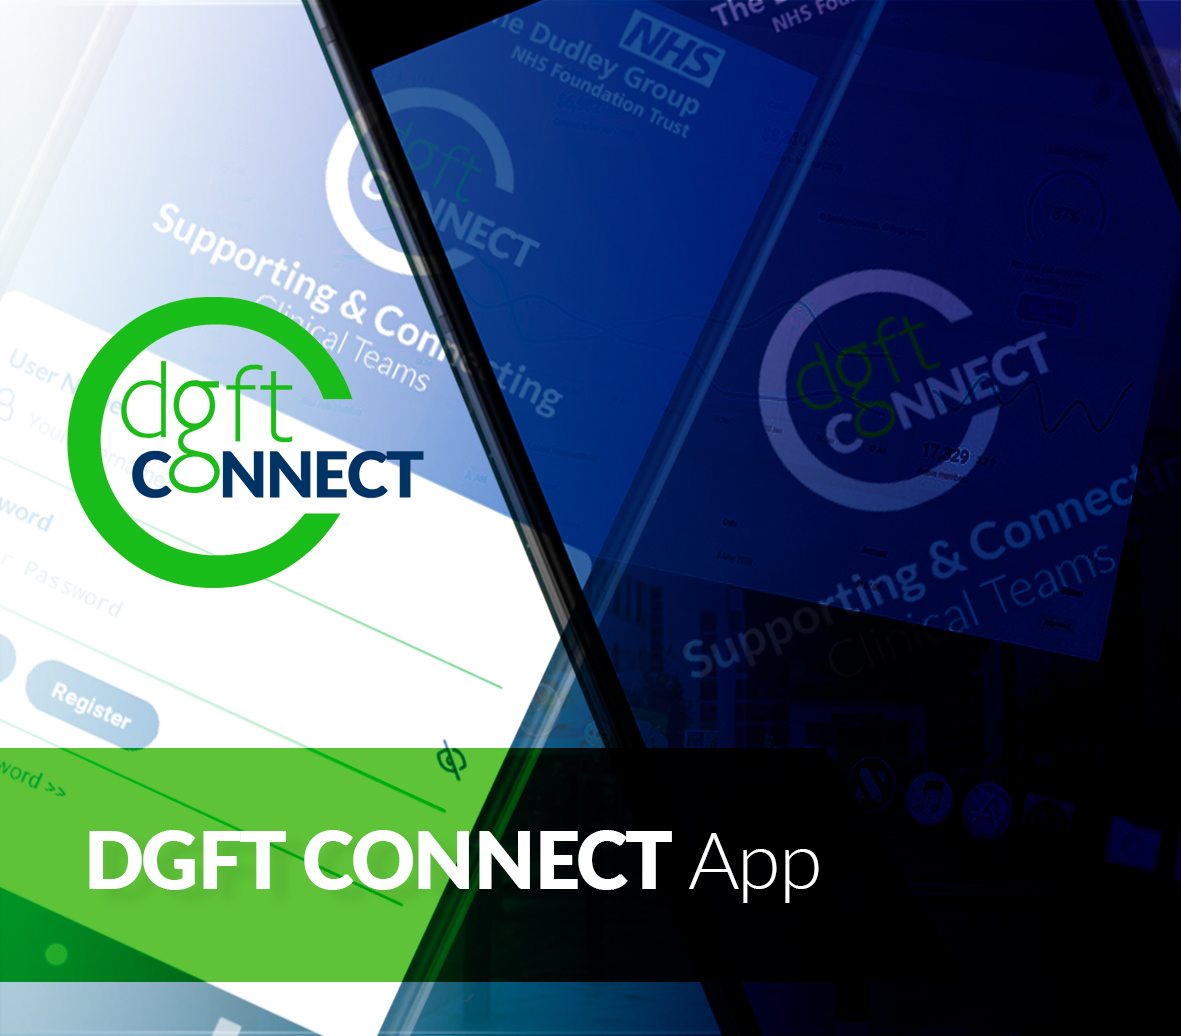 A graphic showing the DGFT Connect resources marketing advert